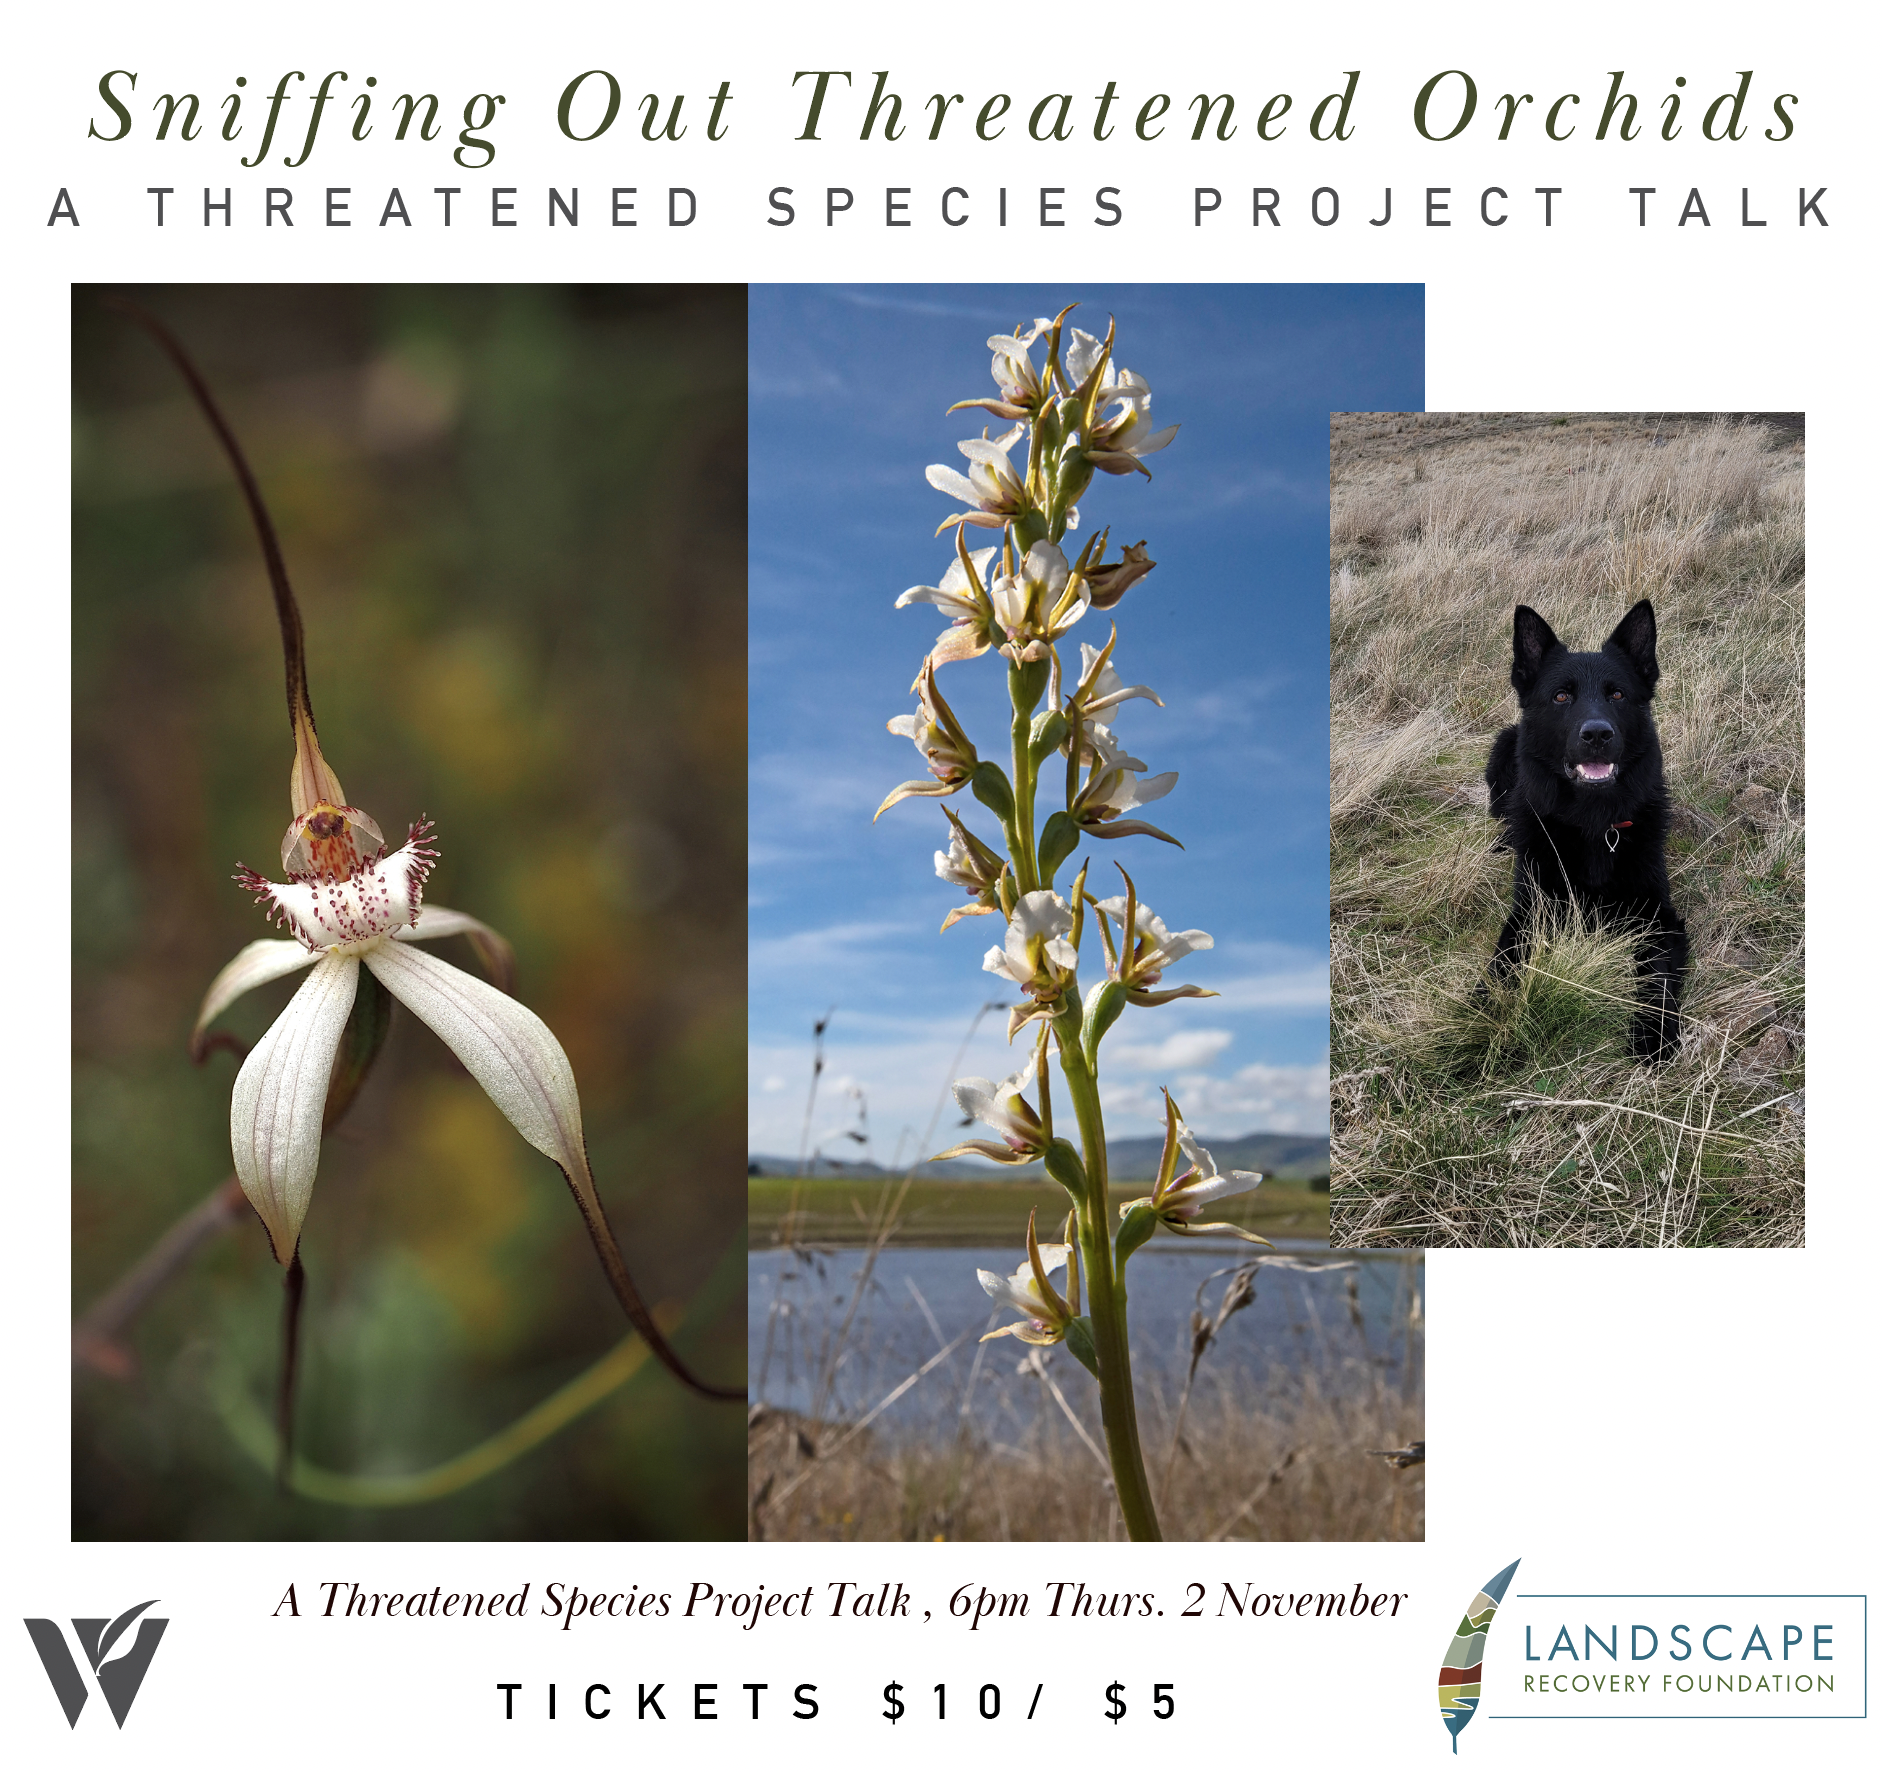 Sniffing Out Threatened Orchids - A Threatened Species Project Talk